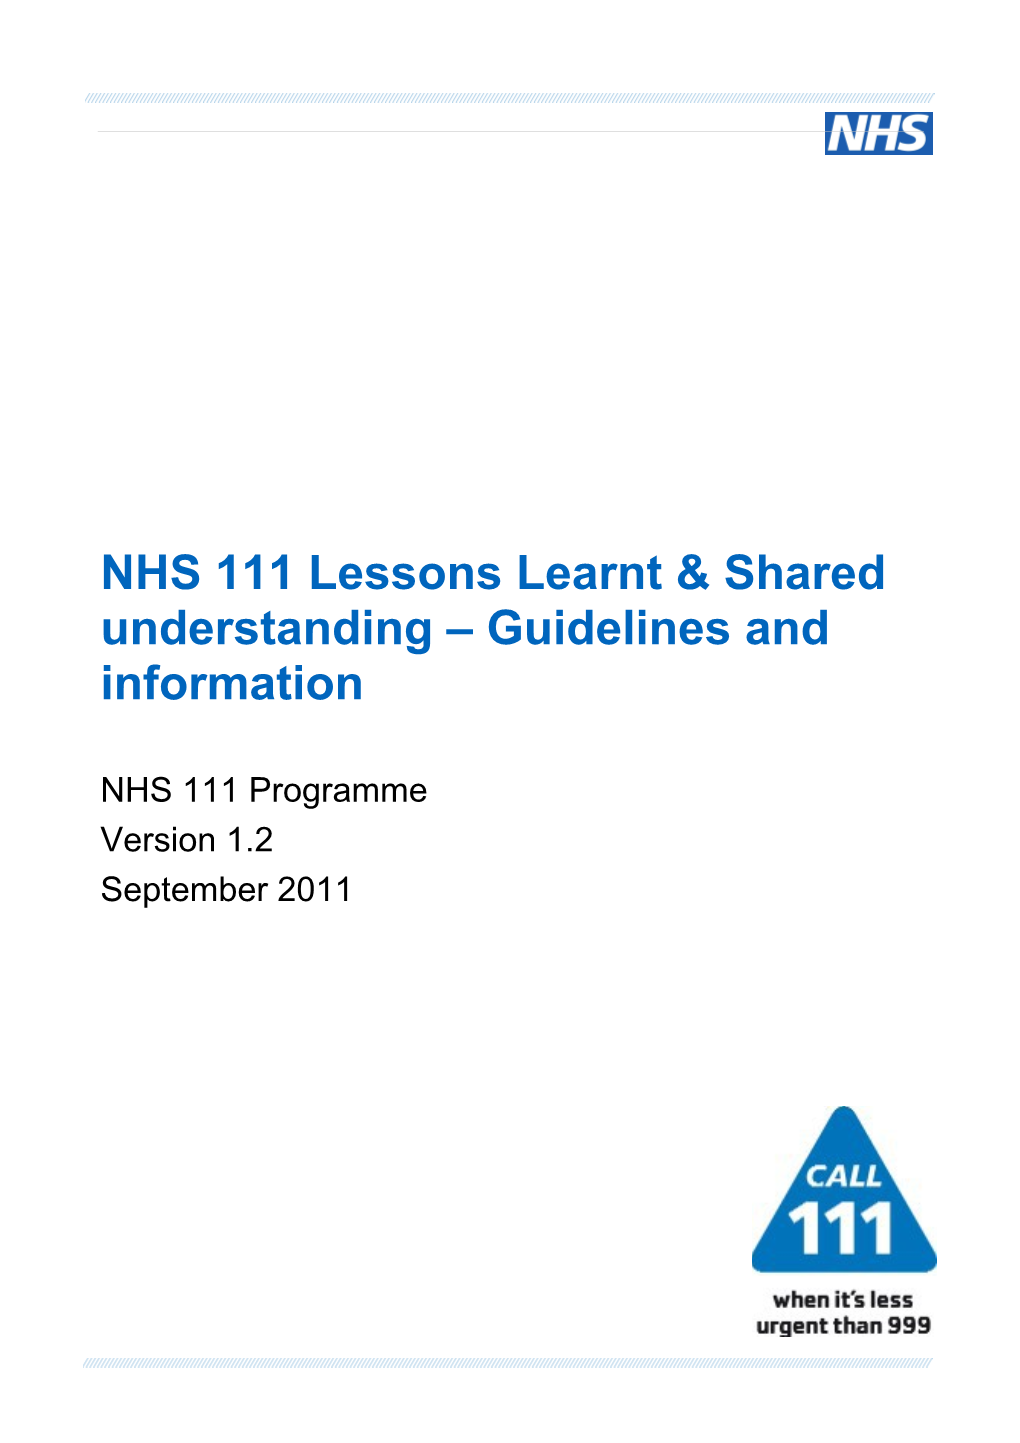 NHS 111 Lessons Learnt & Shared Understanding Guidelines and Information